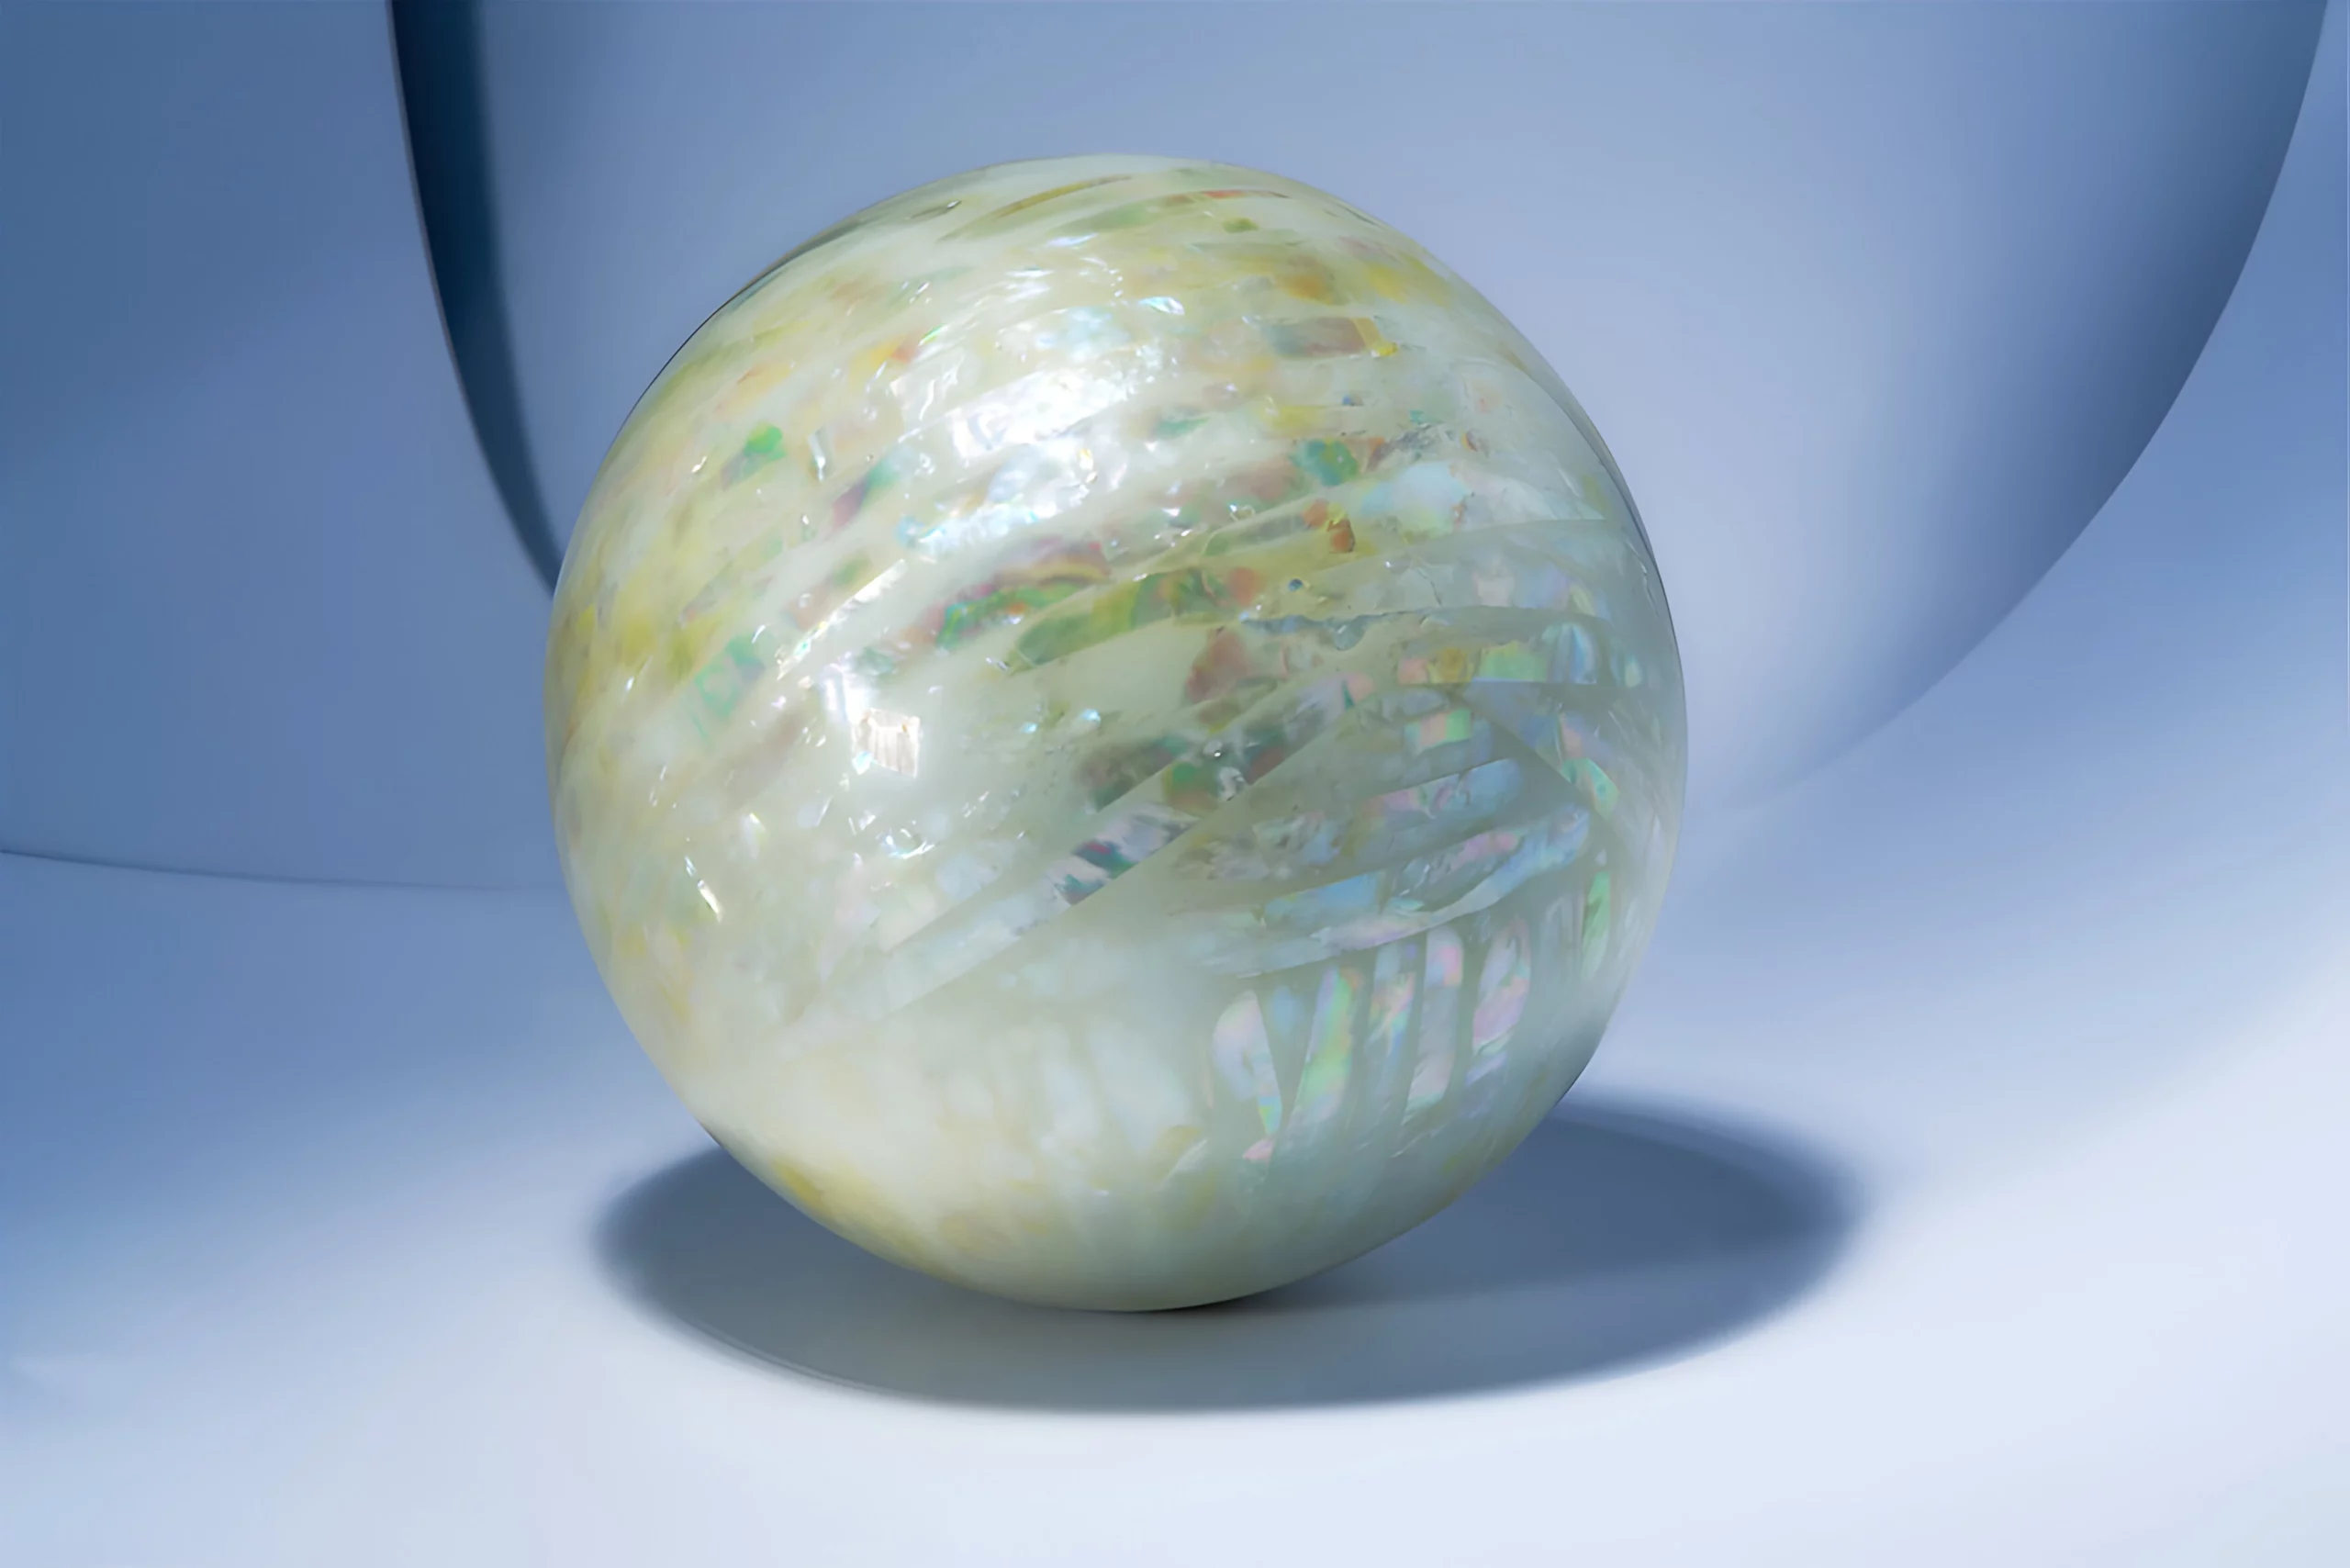 a white round object with iridescent mother of pearls patterns